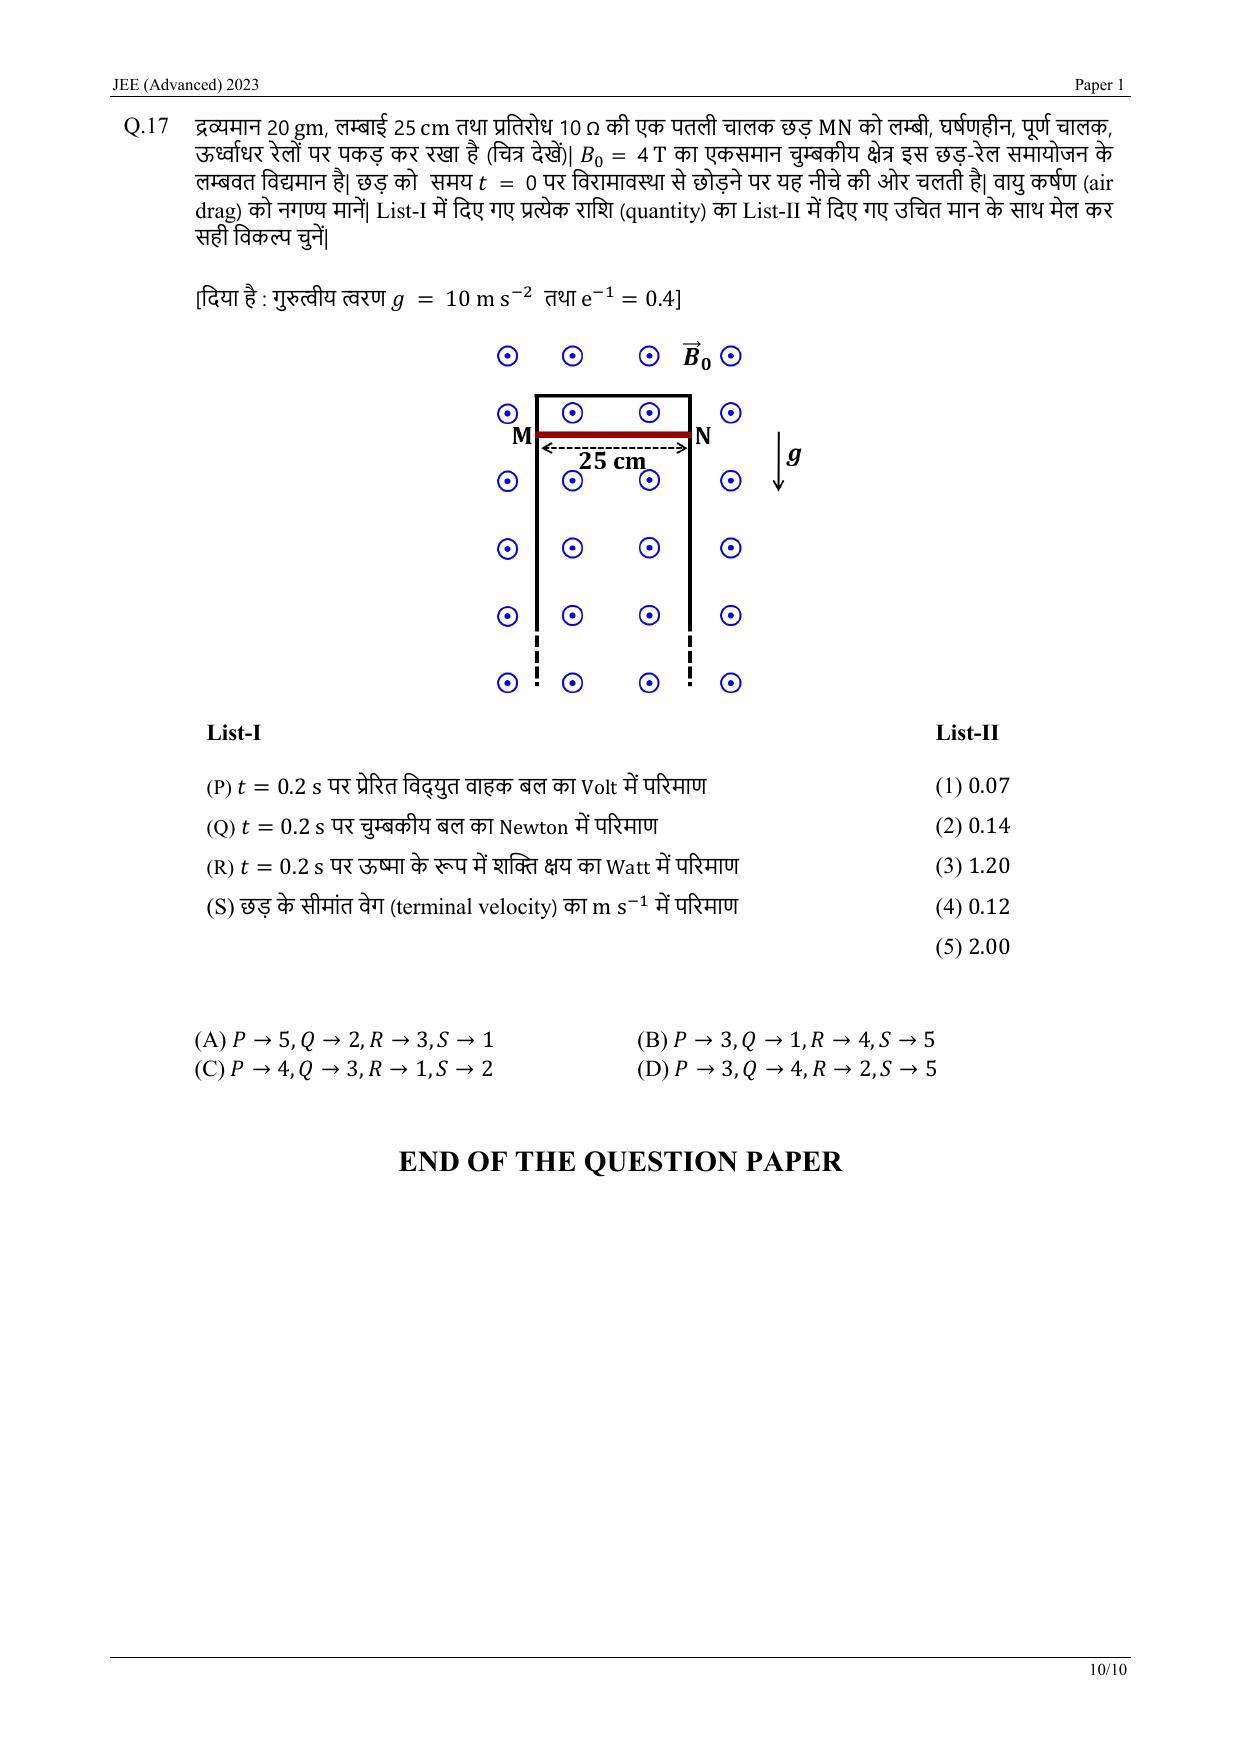 JEE Advanced 2023 Question Paper 1 (Hindi) - Page 20